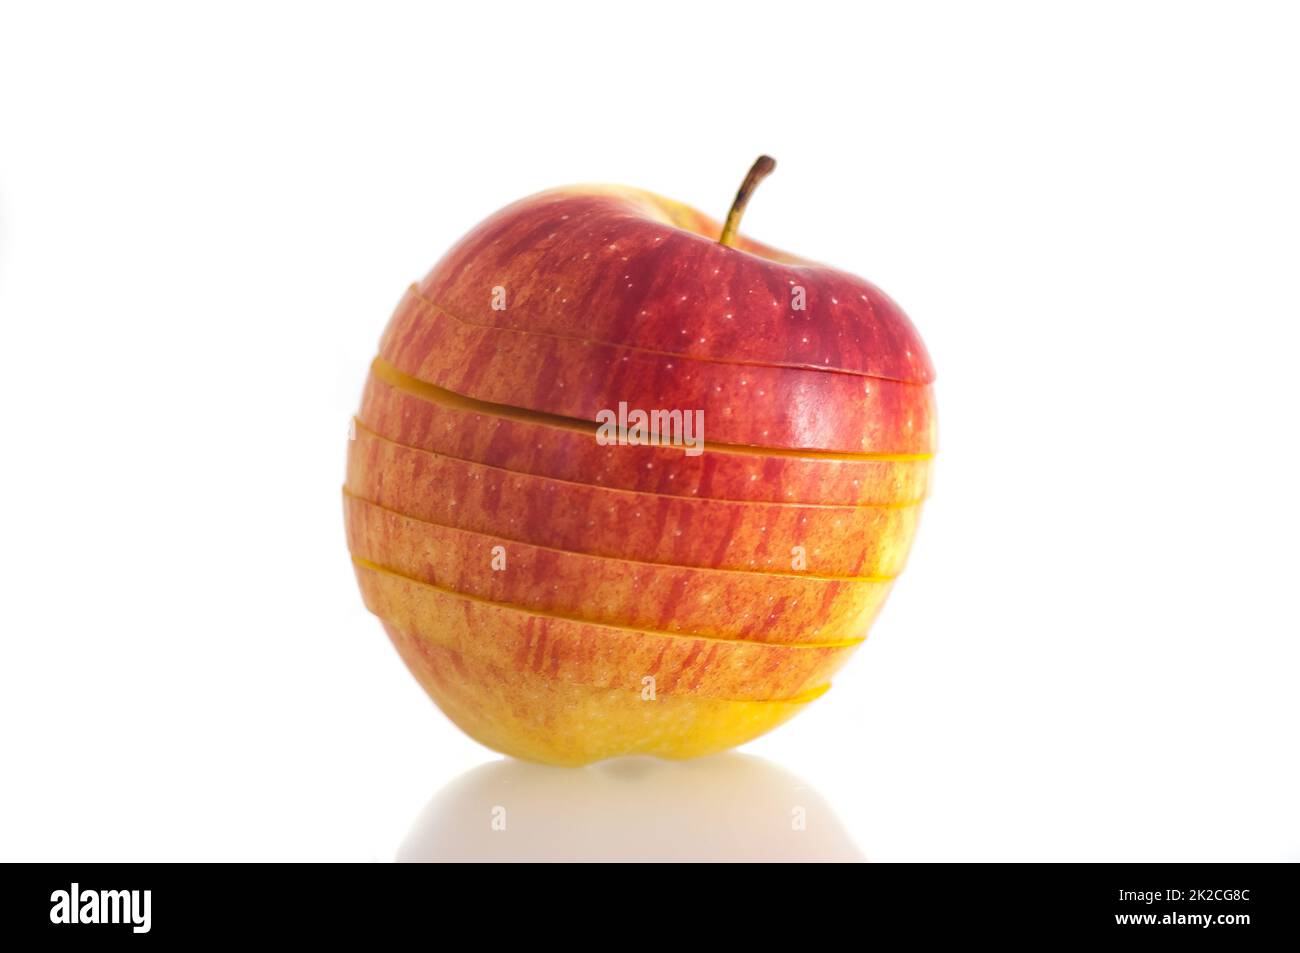 Close-up on a white background isolated red bright, juicy fresh apple sliced into slices. Stock Photo